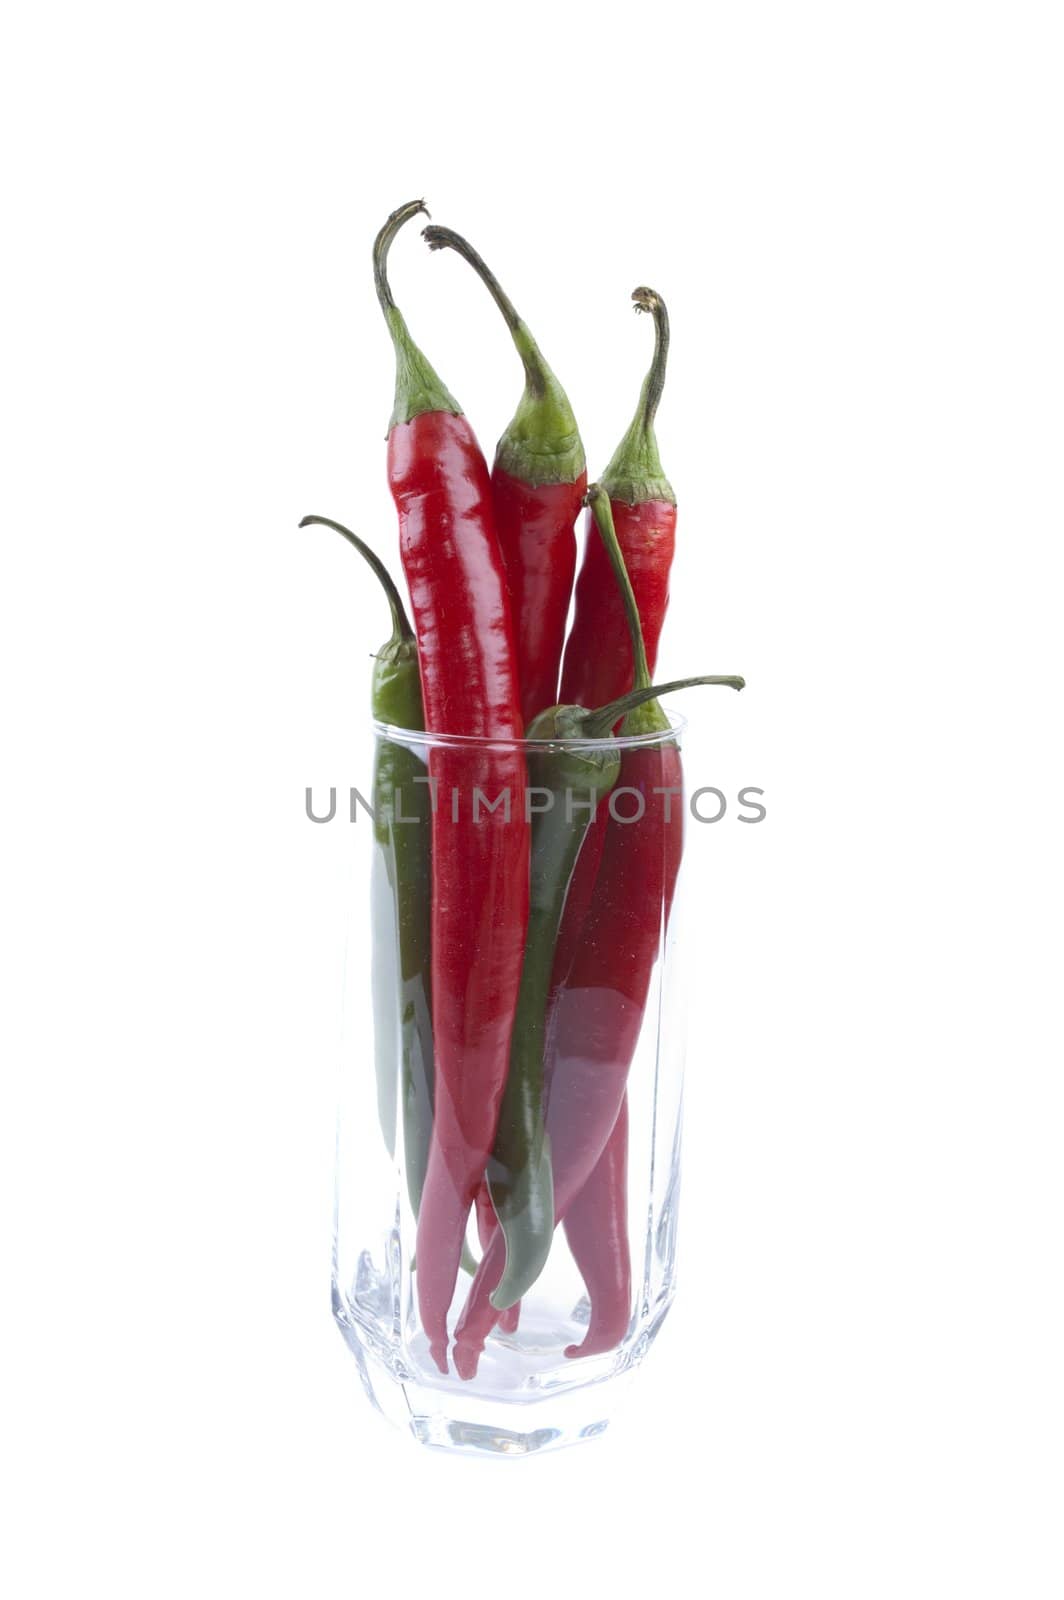 pack of chili peppers in a glass isolated